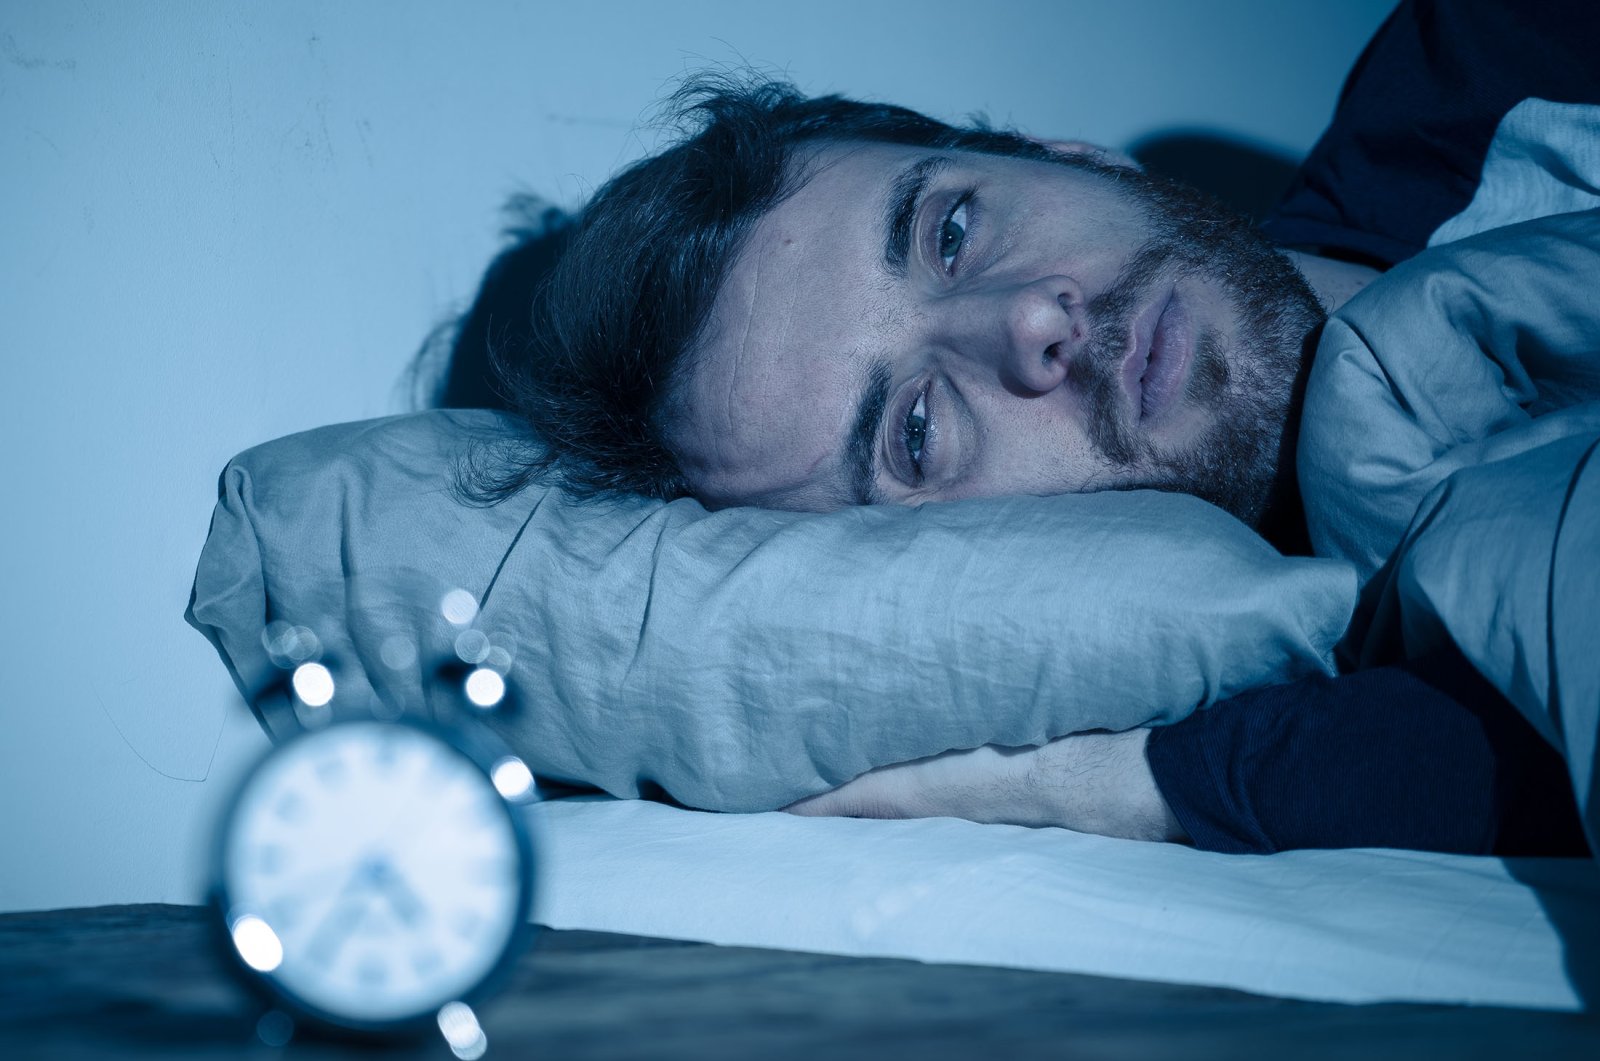 Insomnia is a rising issue across the globe, particularly in the last two years thanks to the COVID-19 pandemic. (Shutterstock Photo)